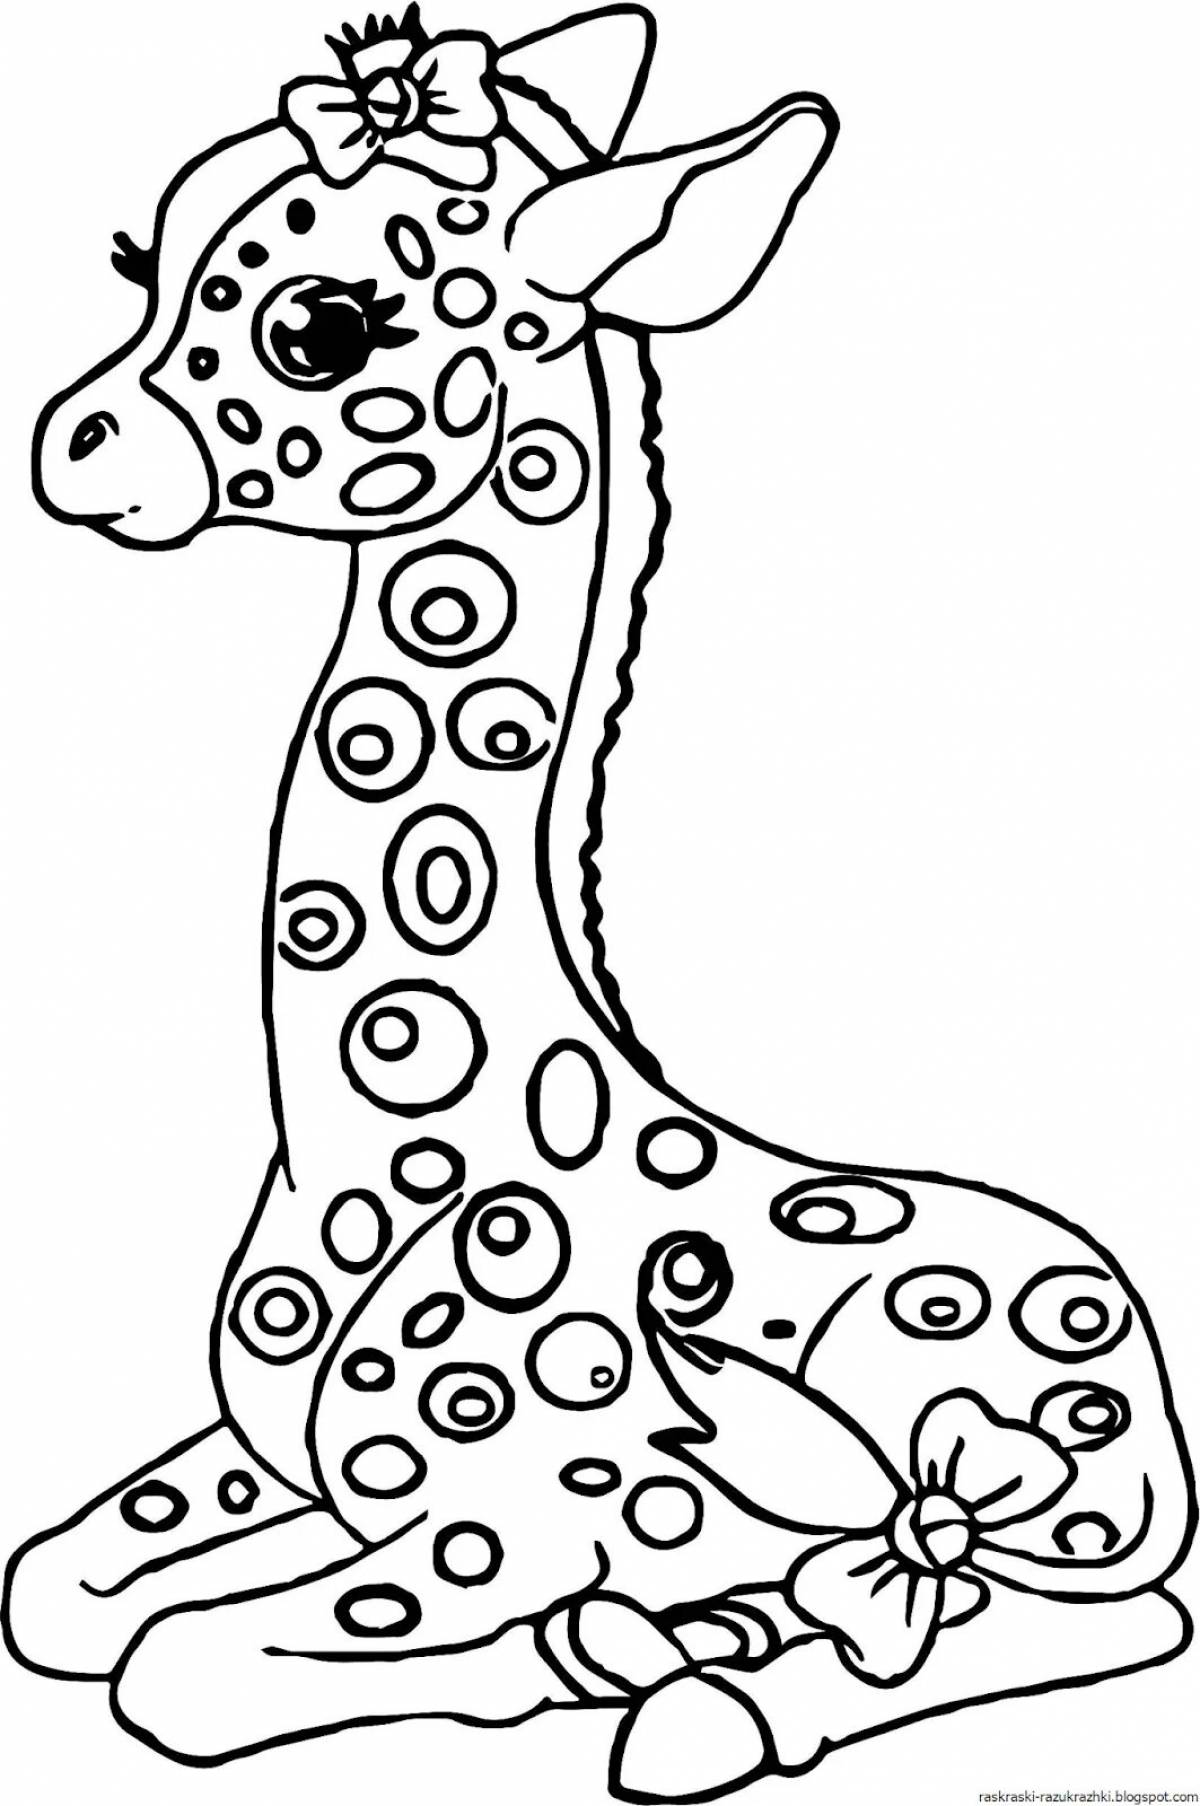 Great drawing of a giraffe for kids